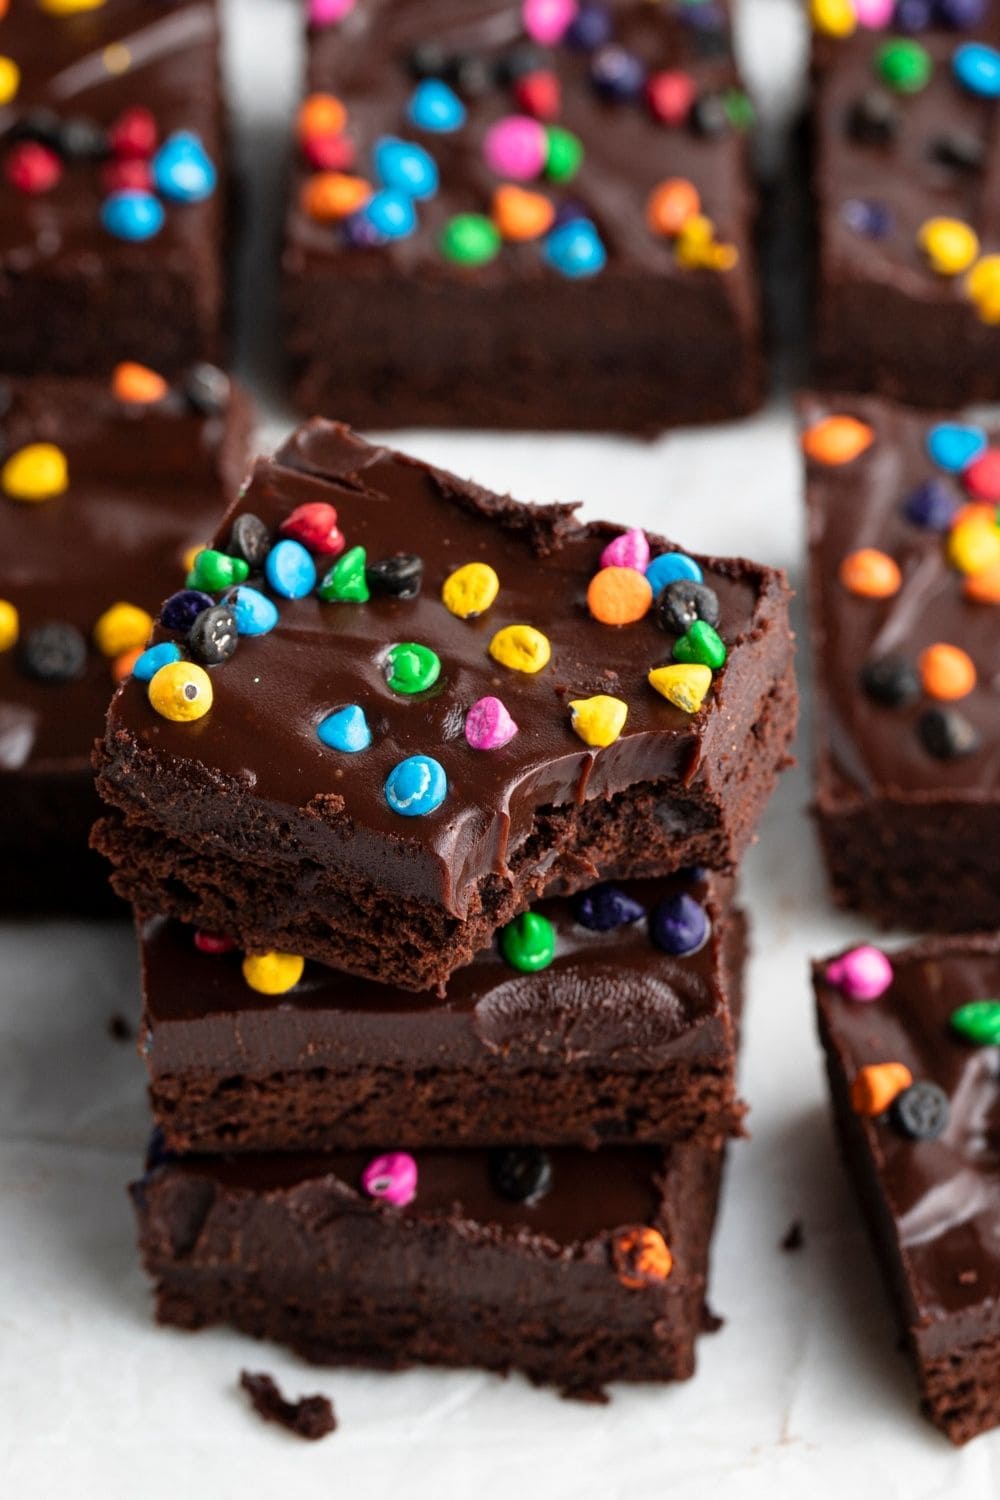 Chocolate Cosmic Brownies with Candies on top